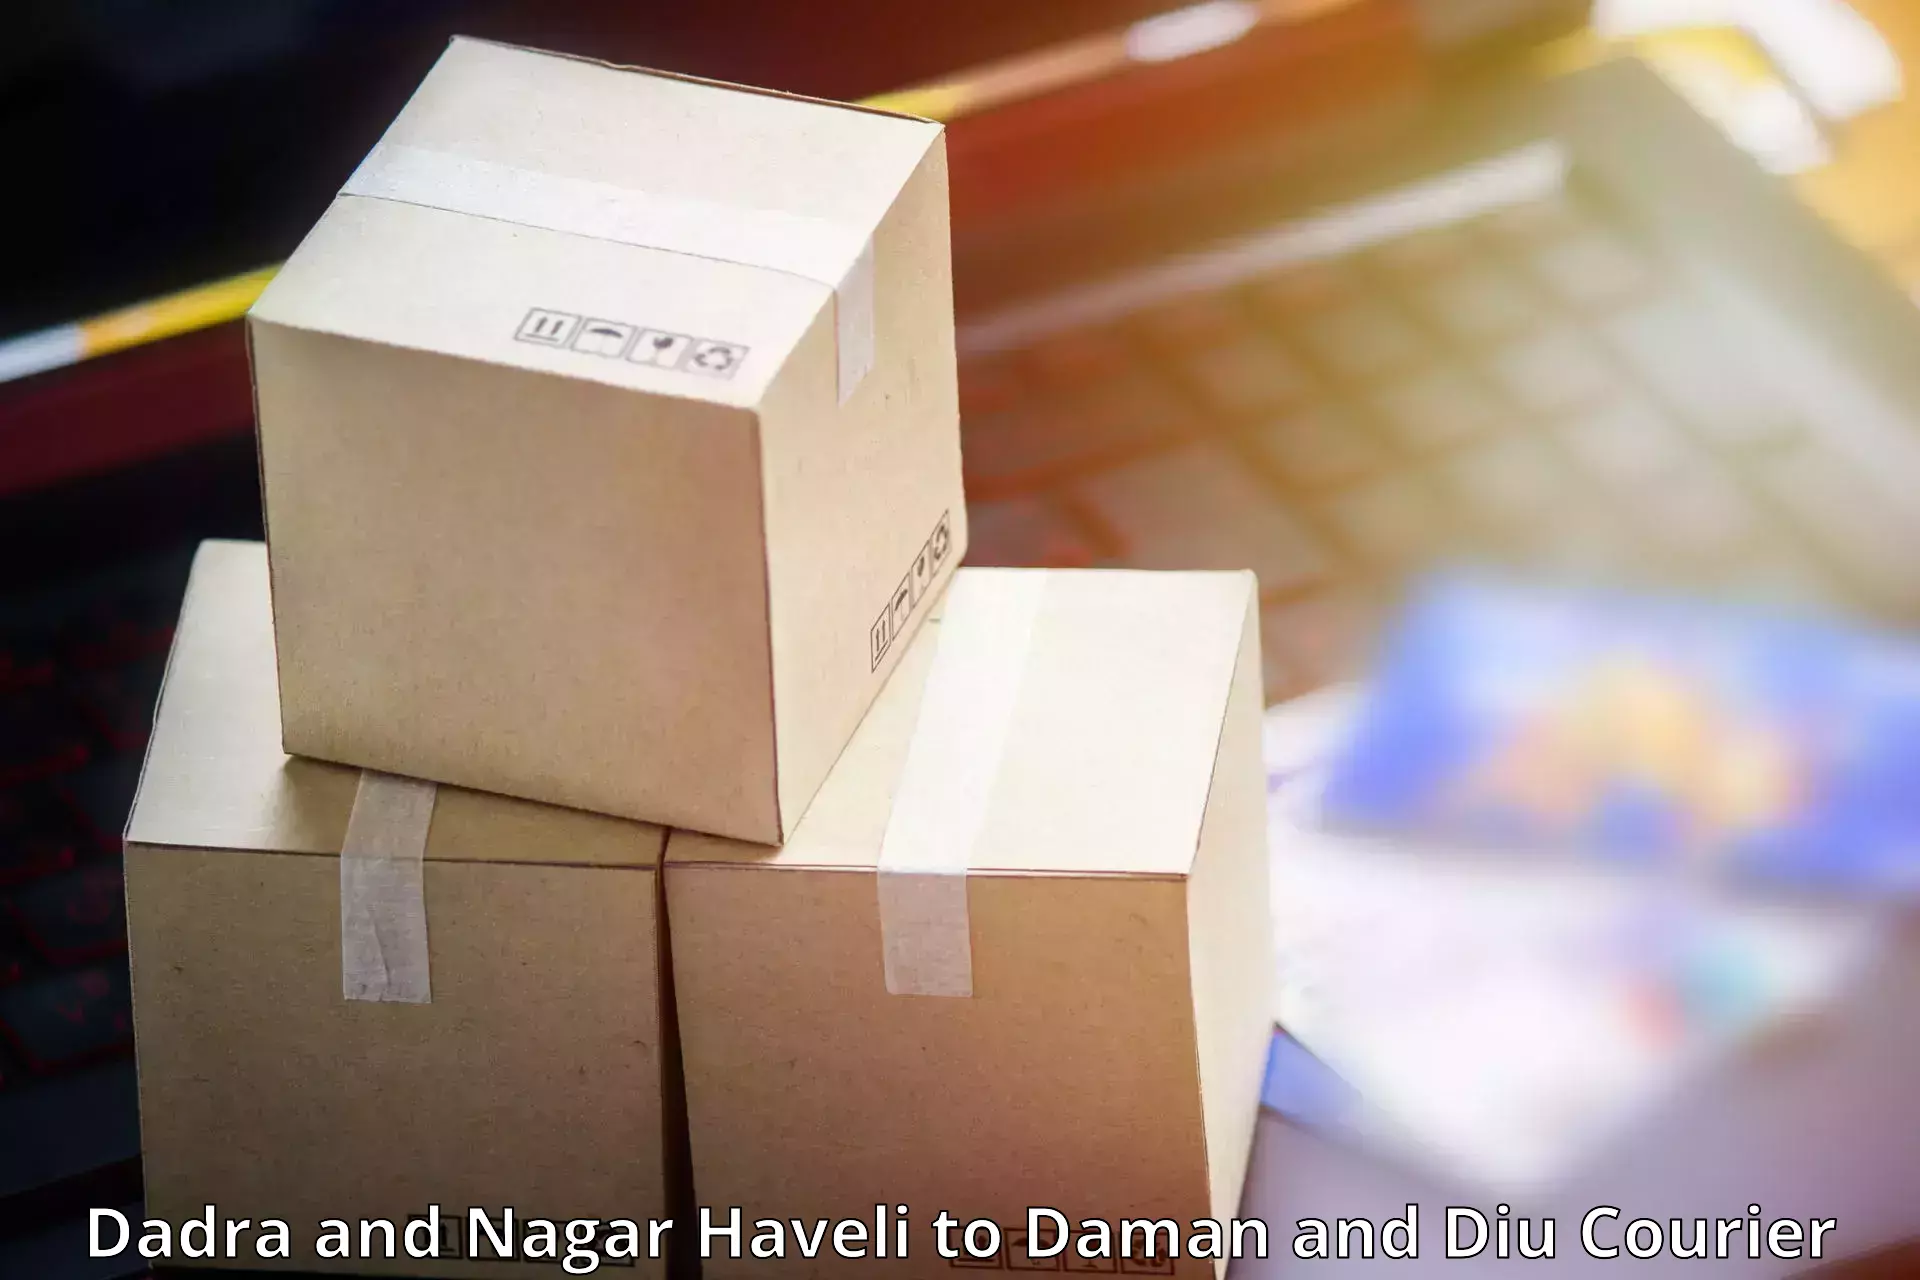 Express courier capabilities in Dadra and Nagar Haveli to Daman